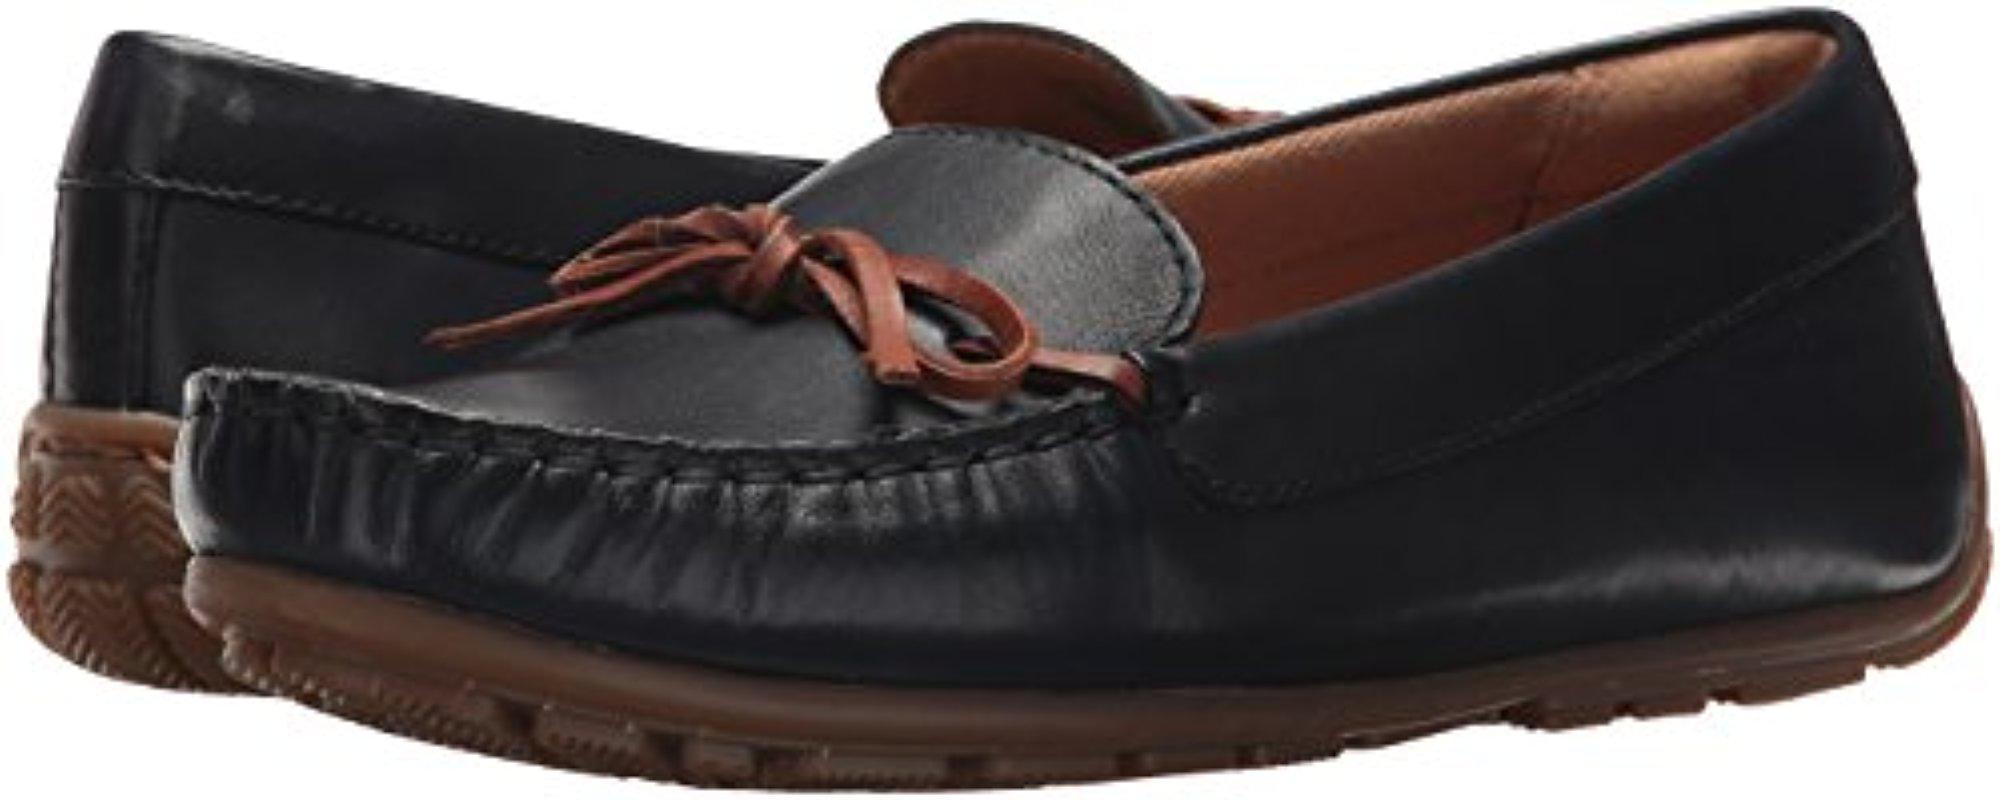 Dameo Swing Driving Style Loafer 